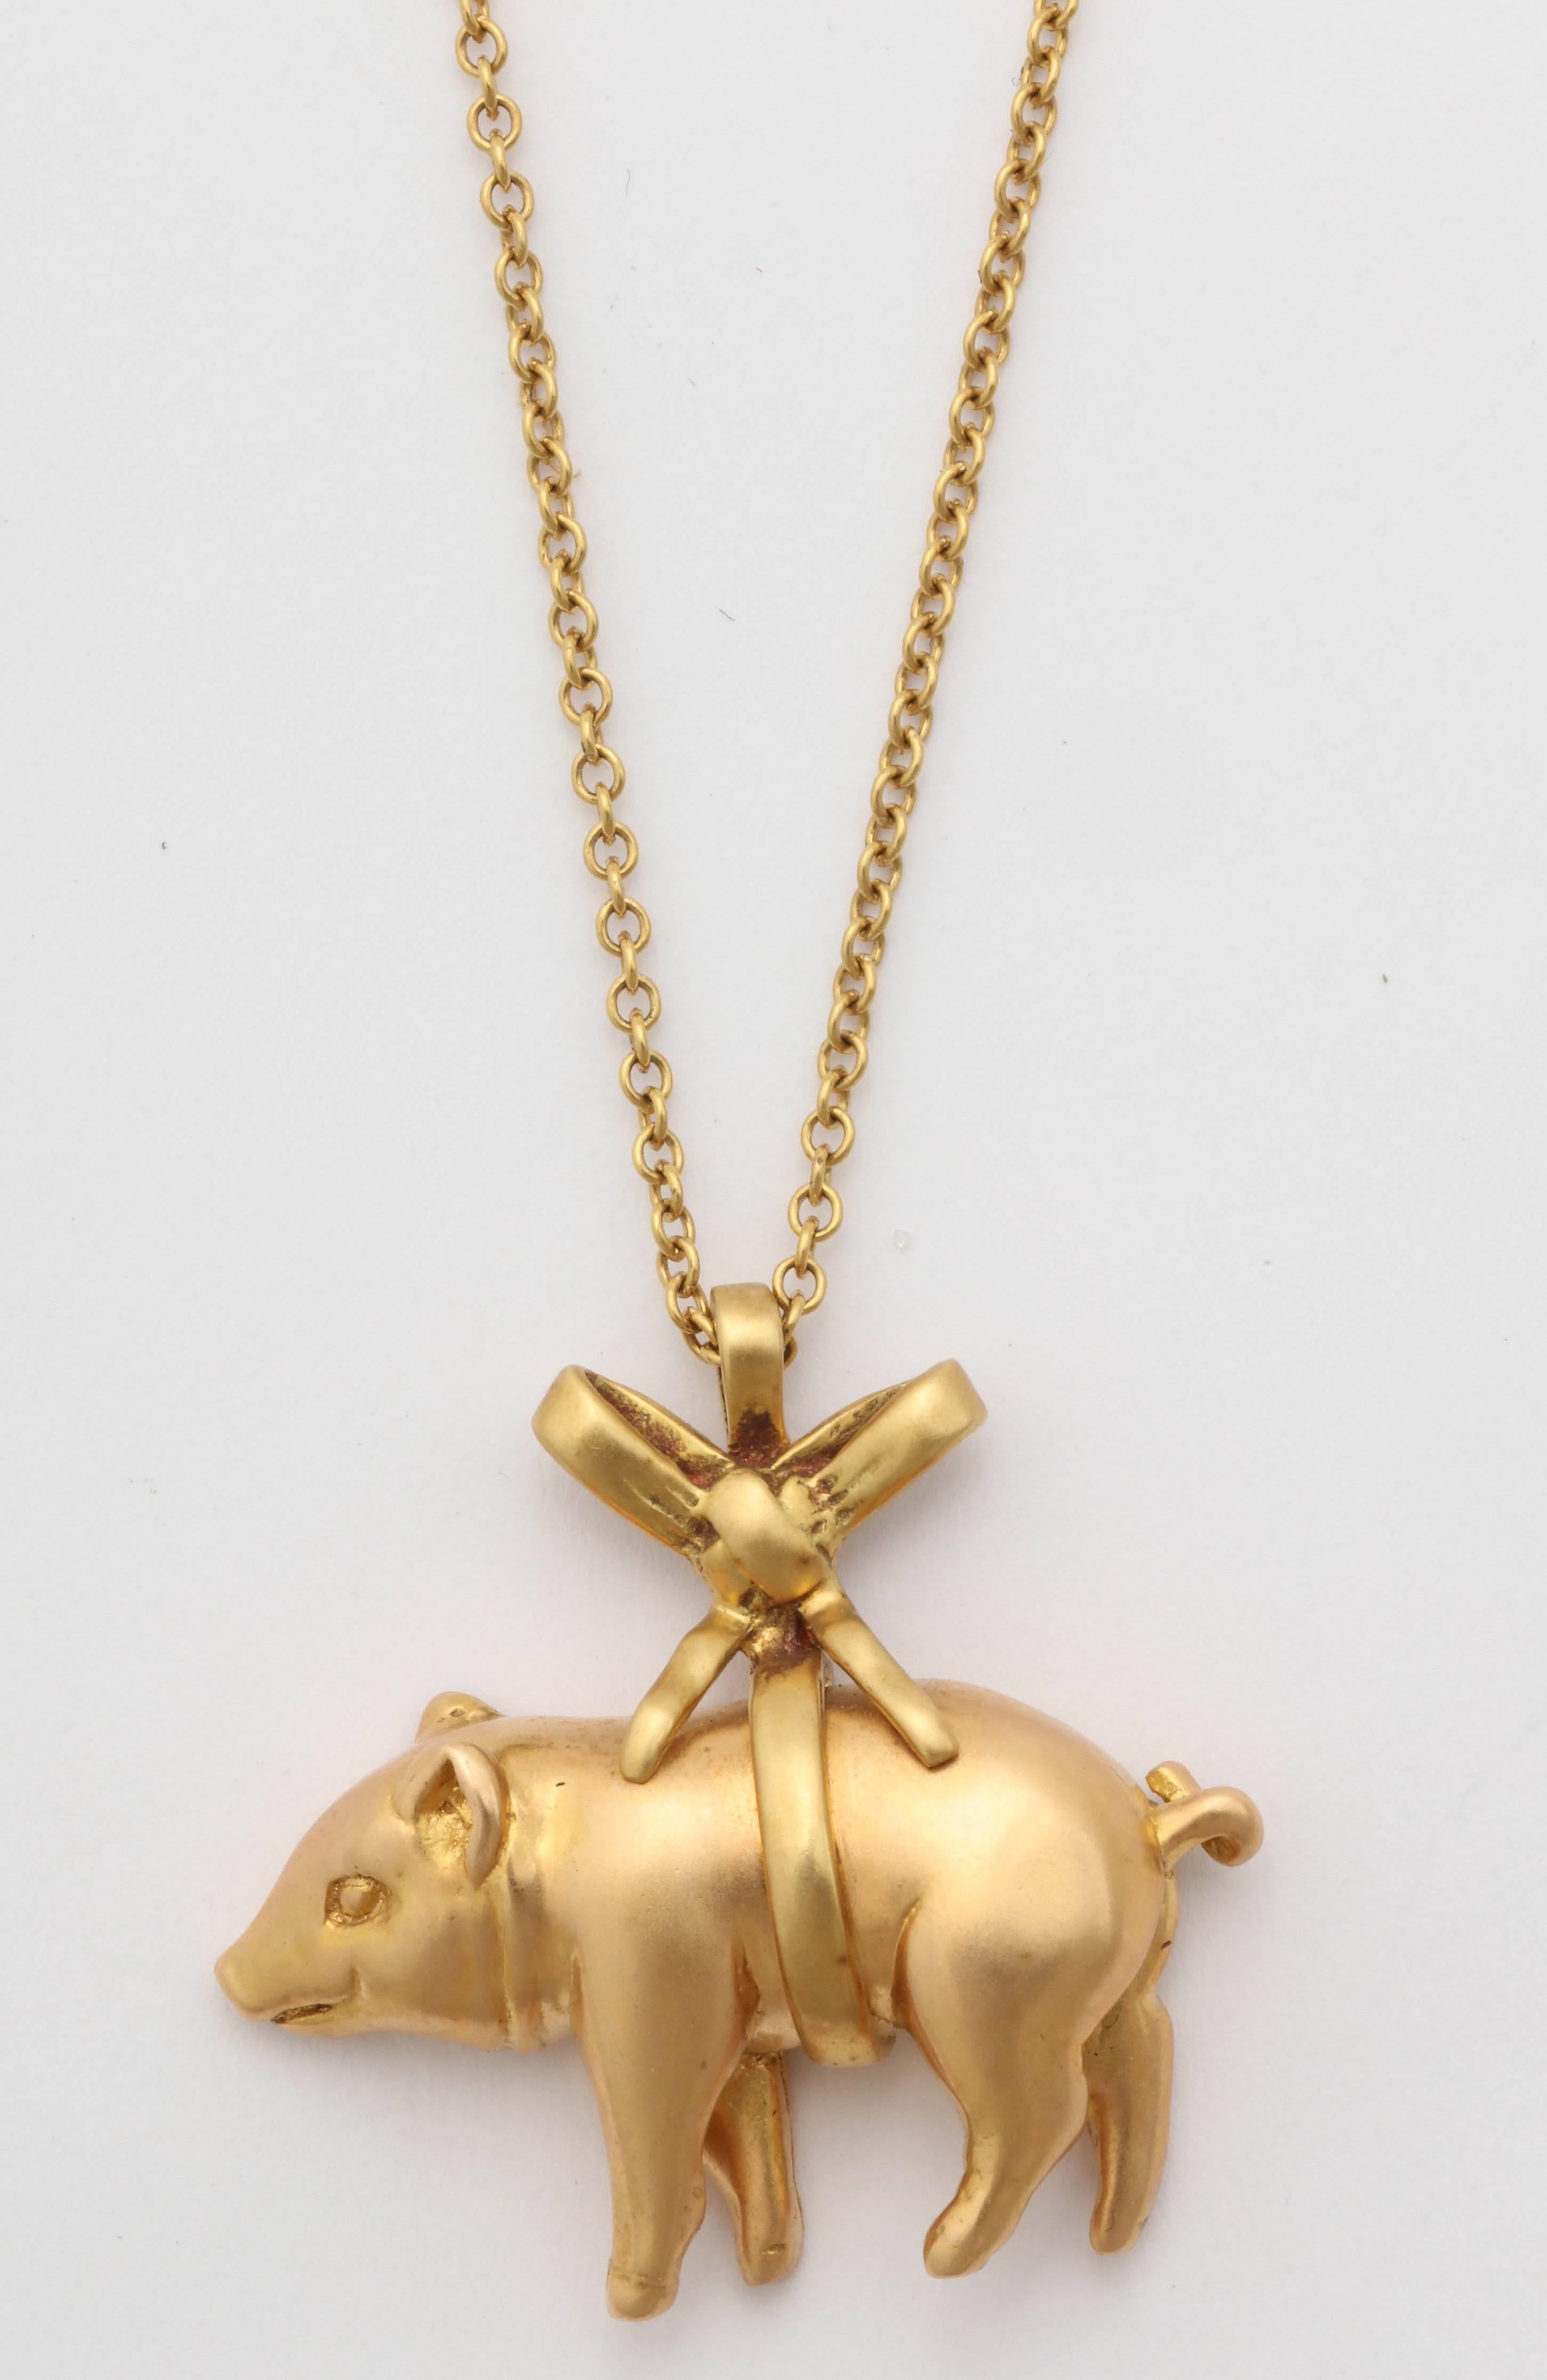 Charming little rose gold pig pendant wrapped in a ribbon of 18kt yellow gold. 
Can be worn as a pendant or attached to a charm bracelet.
Chain sold separately.